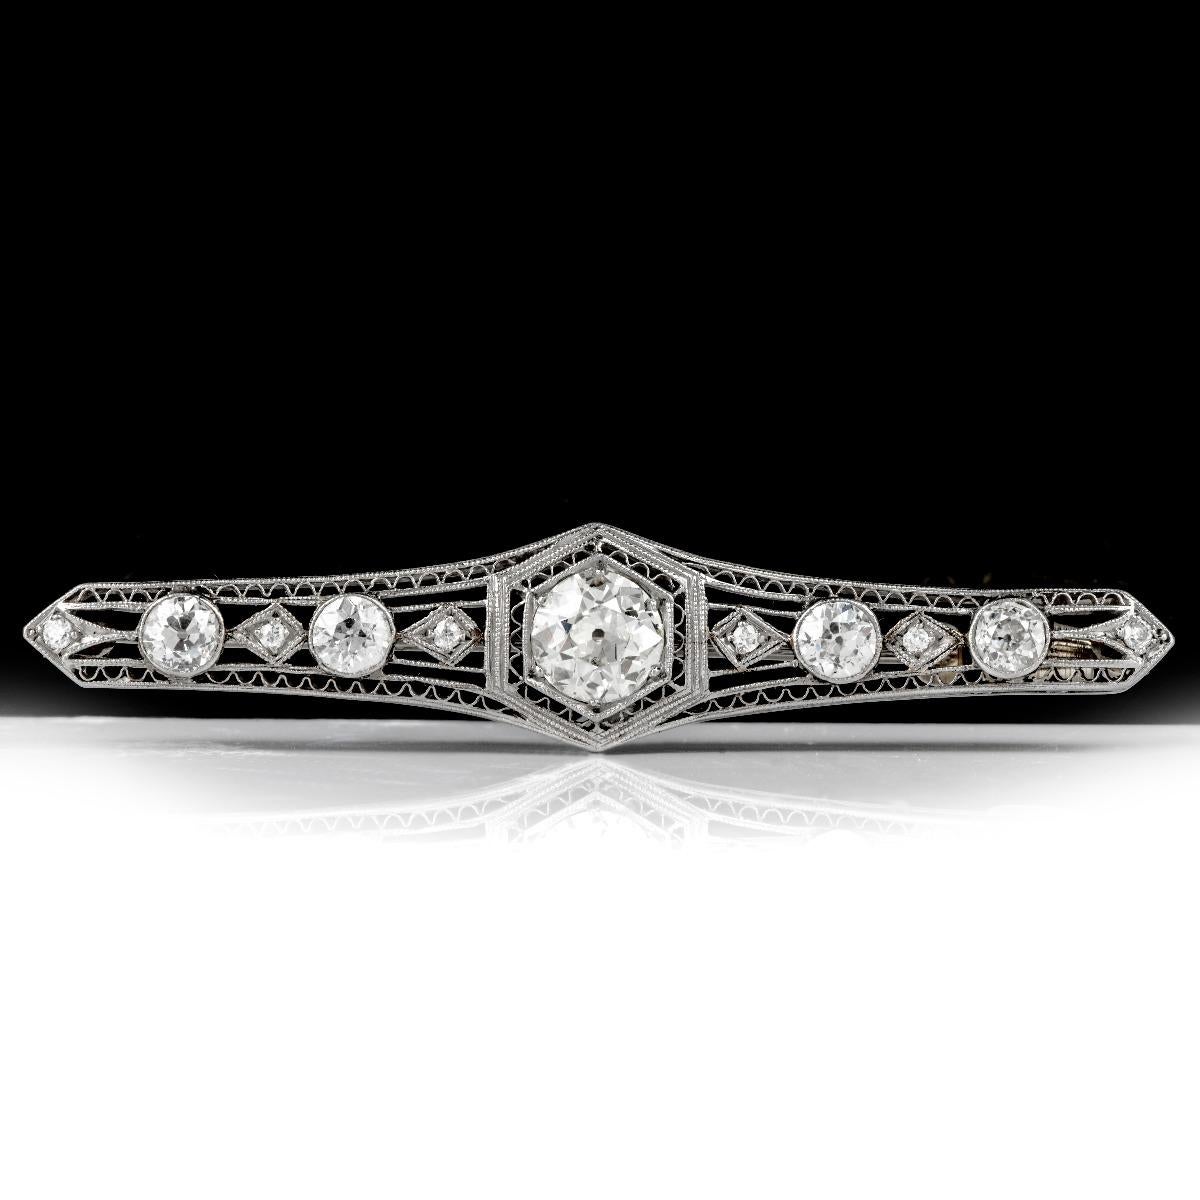 This authentic antique bar brooch of the classic allure is crafted in solid platinum and exposes an eminent 1.40 ct old European-cut diamond at the center, graded I color, VS2 clarity. Complemented by four flanking round old European cut diamonds,